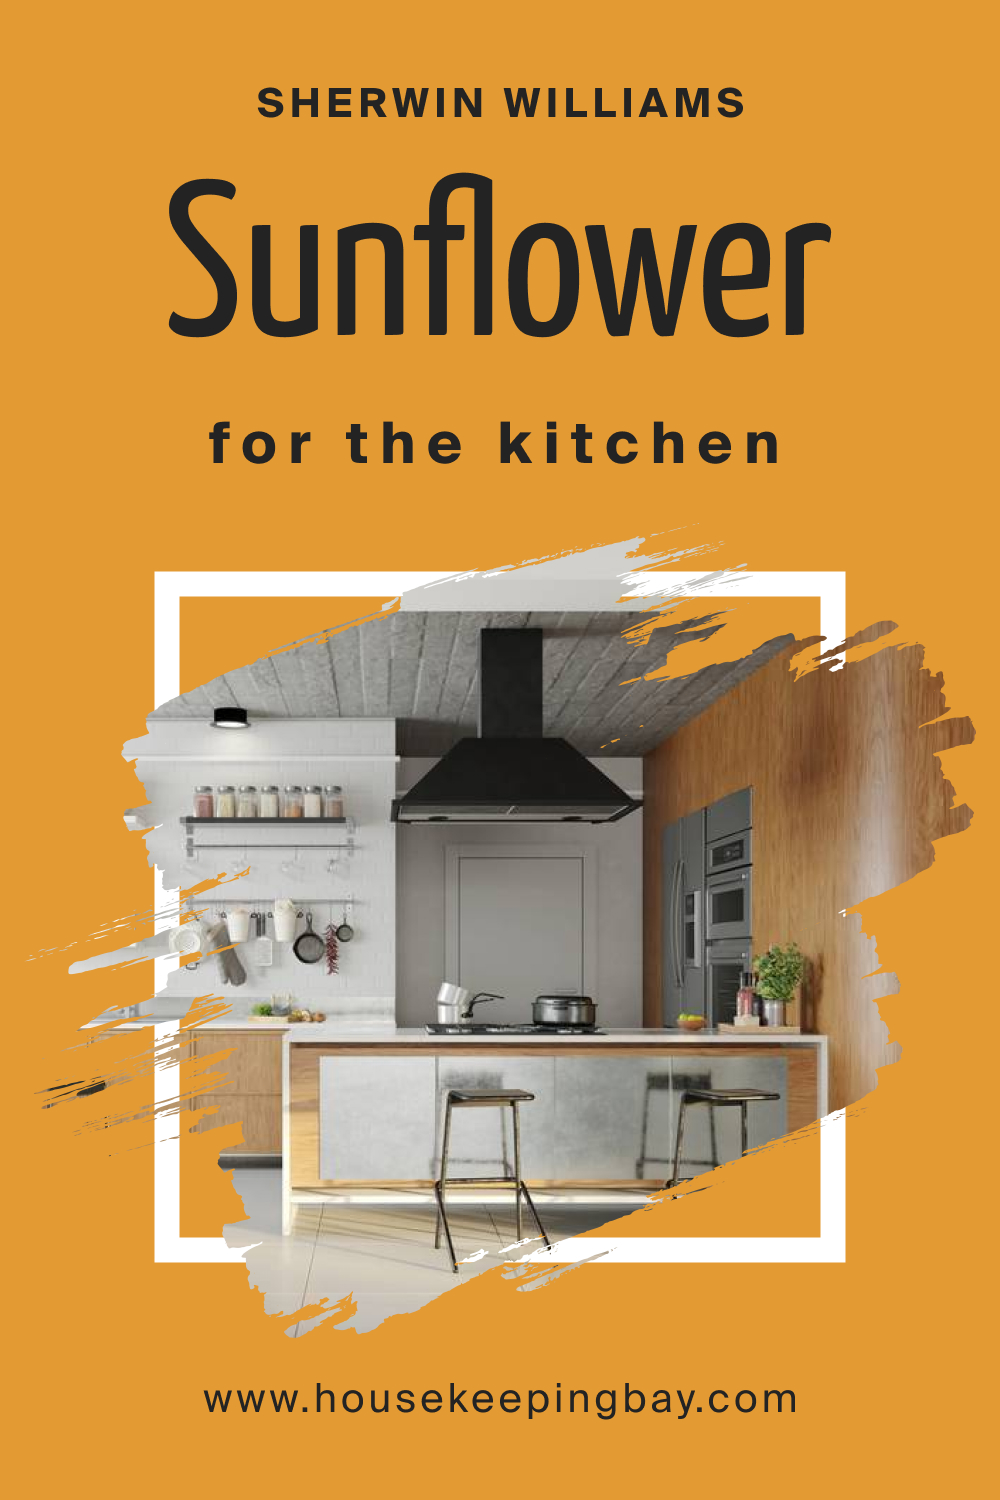 Sherwin Williams. Sunflower SW 6678 For the Kitchens